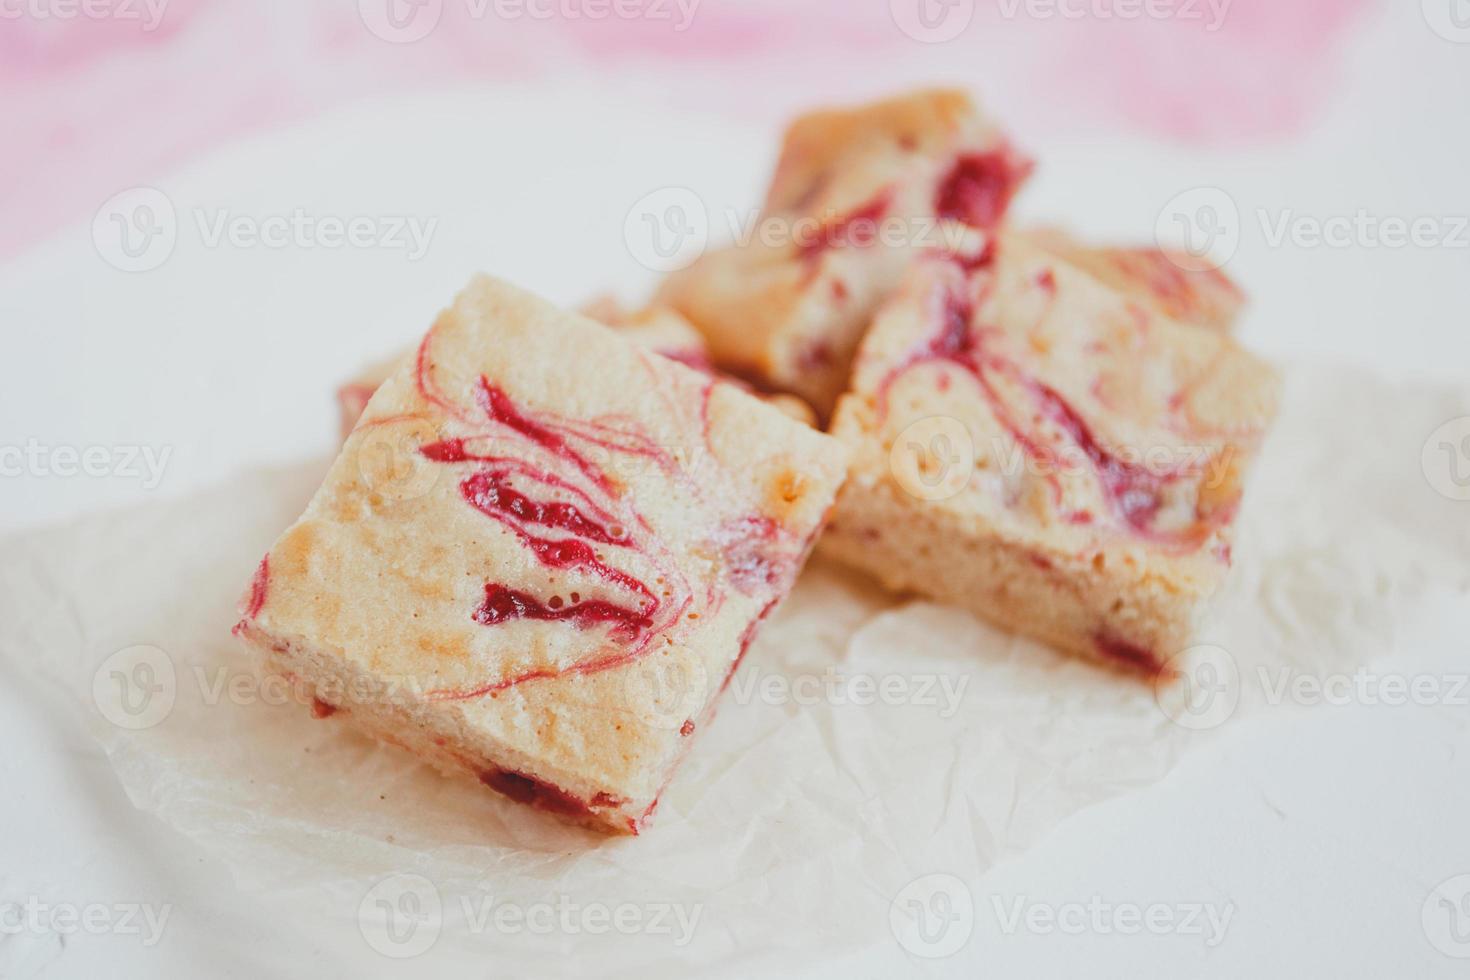 Homemade blondies, made of white chocolate with fresh raspberries, on a light background. photo